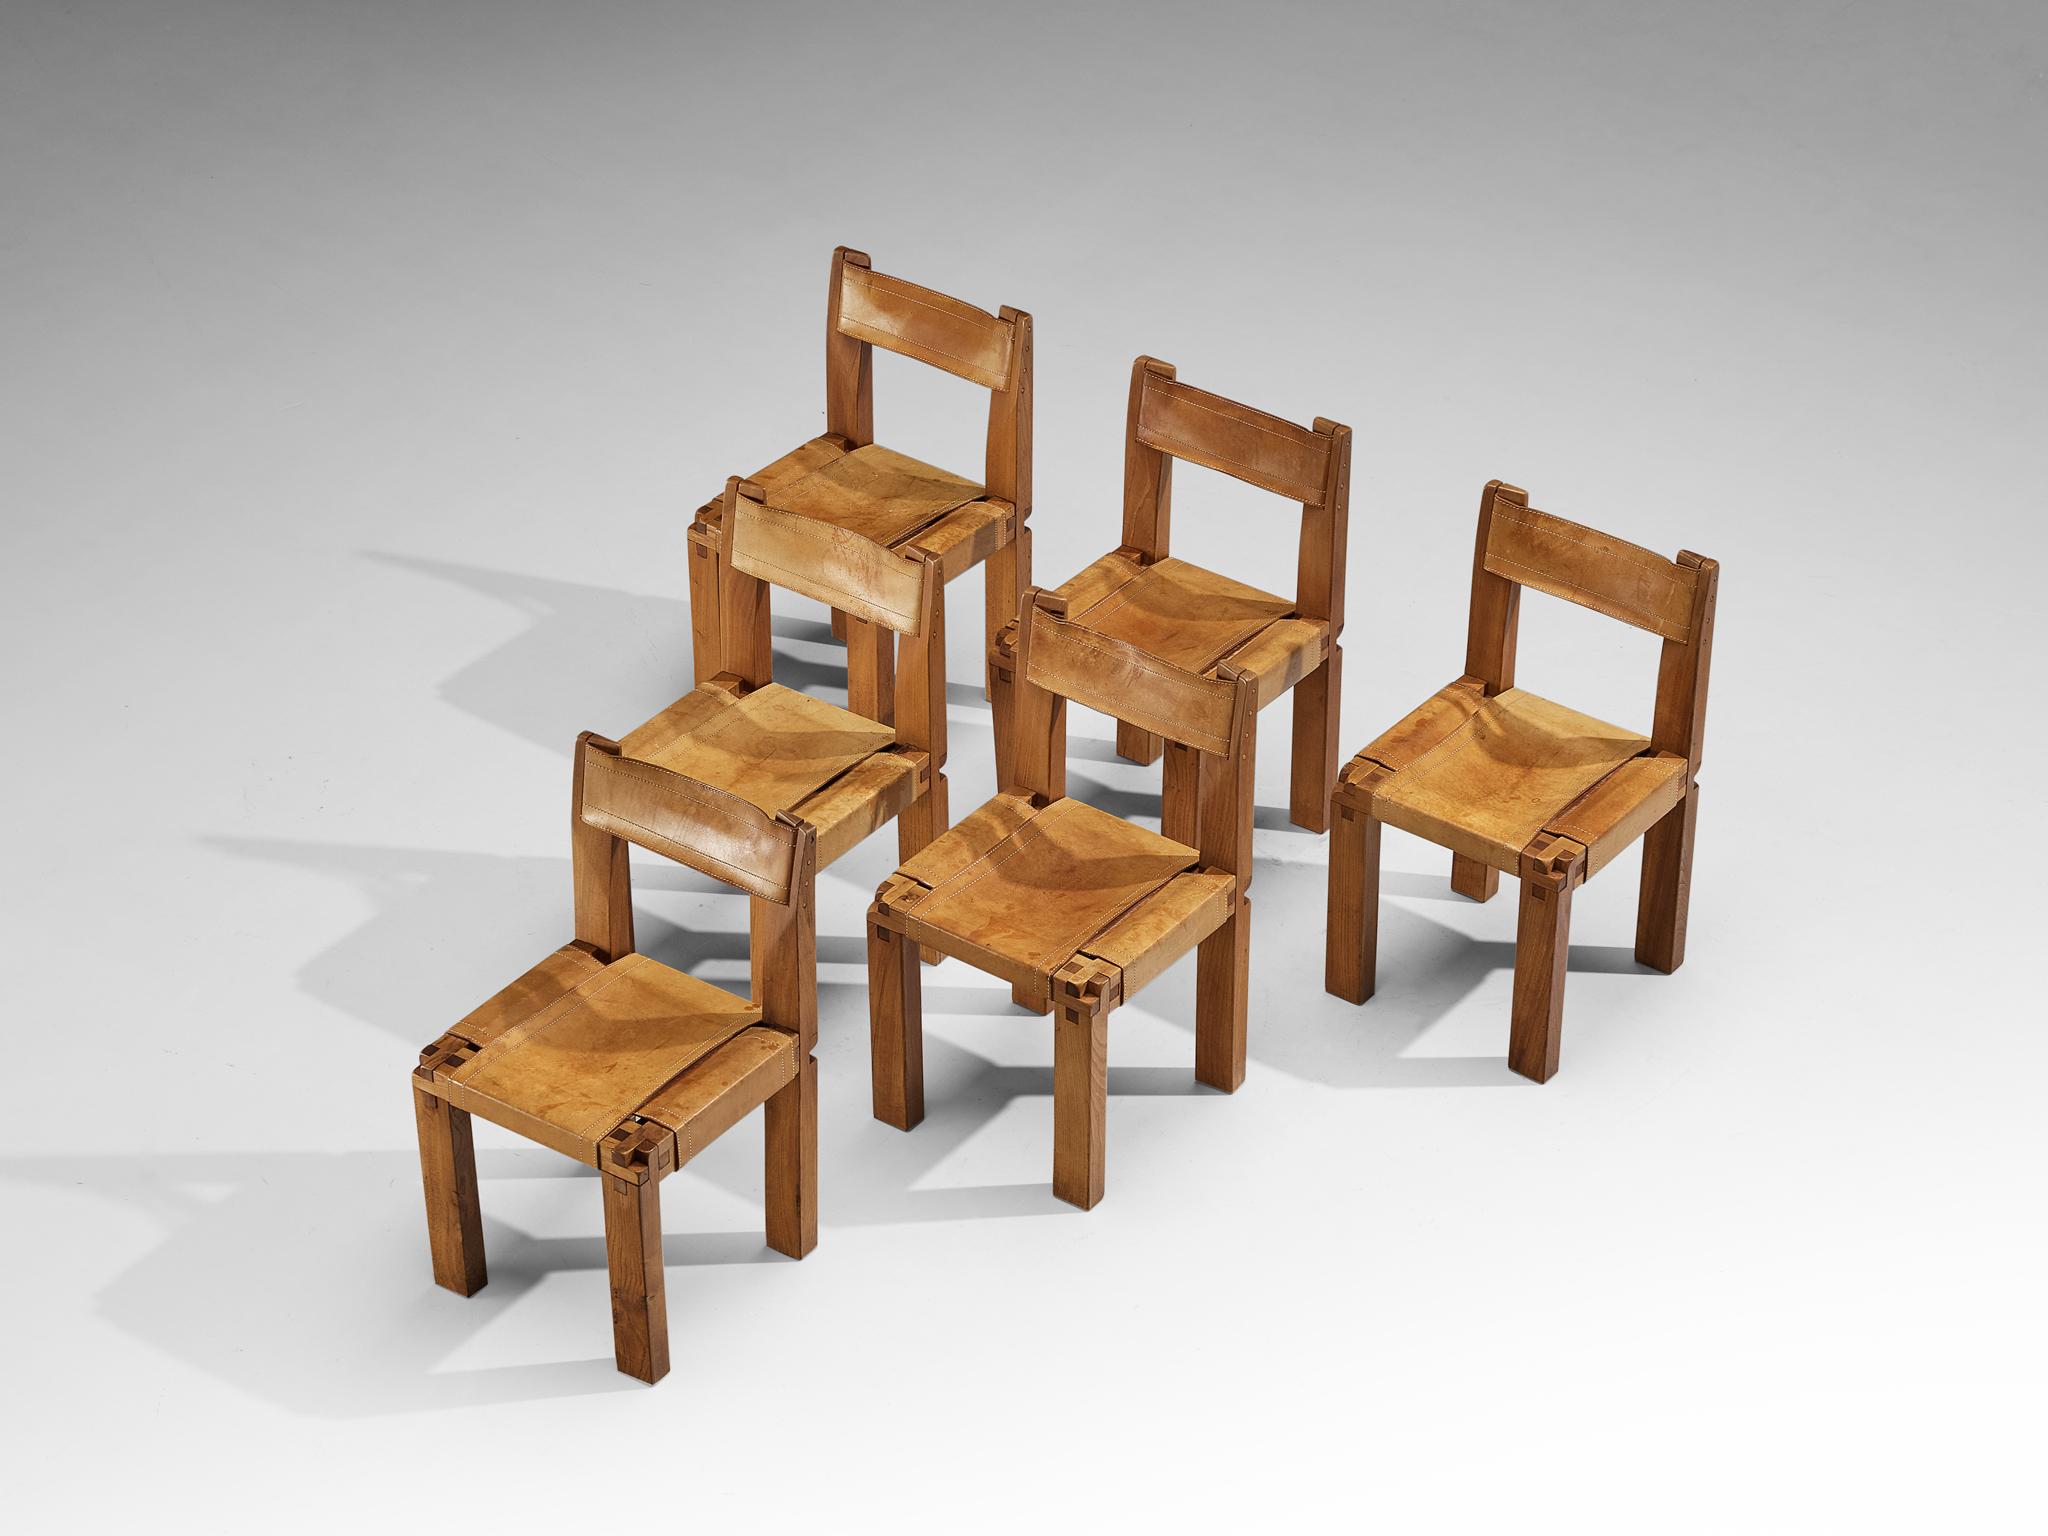 Pierre Chapo, set of six dining chairs model 'S11', elm, leather, rope, France, circa 1966.

This design is an early edition, created according to the original craft methodology of Pierre Chapo. Crafted from solid elmwood, the chairs exhibit a